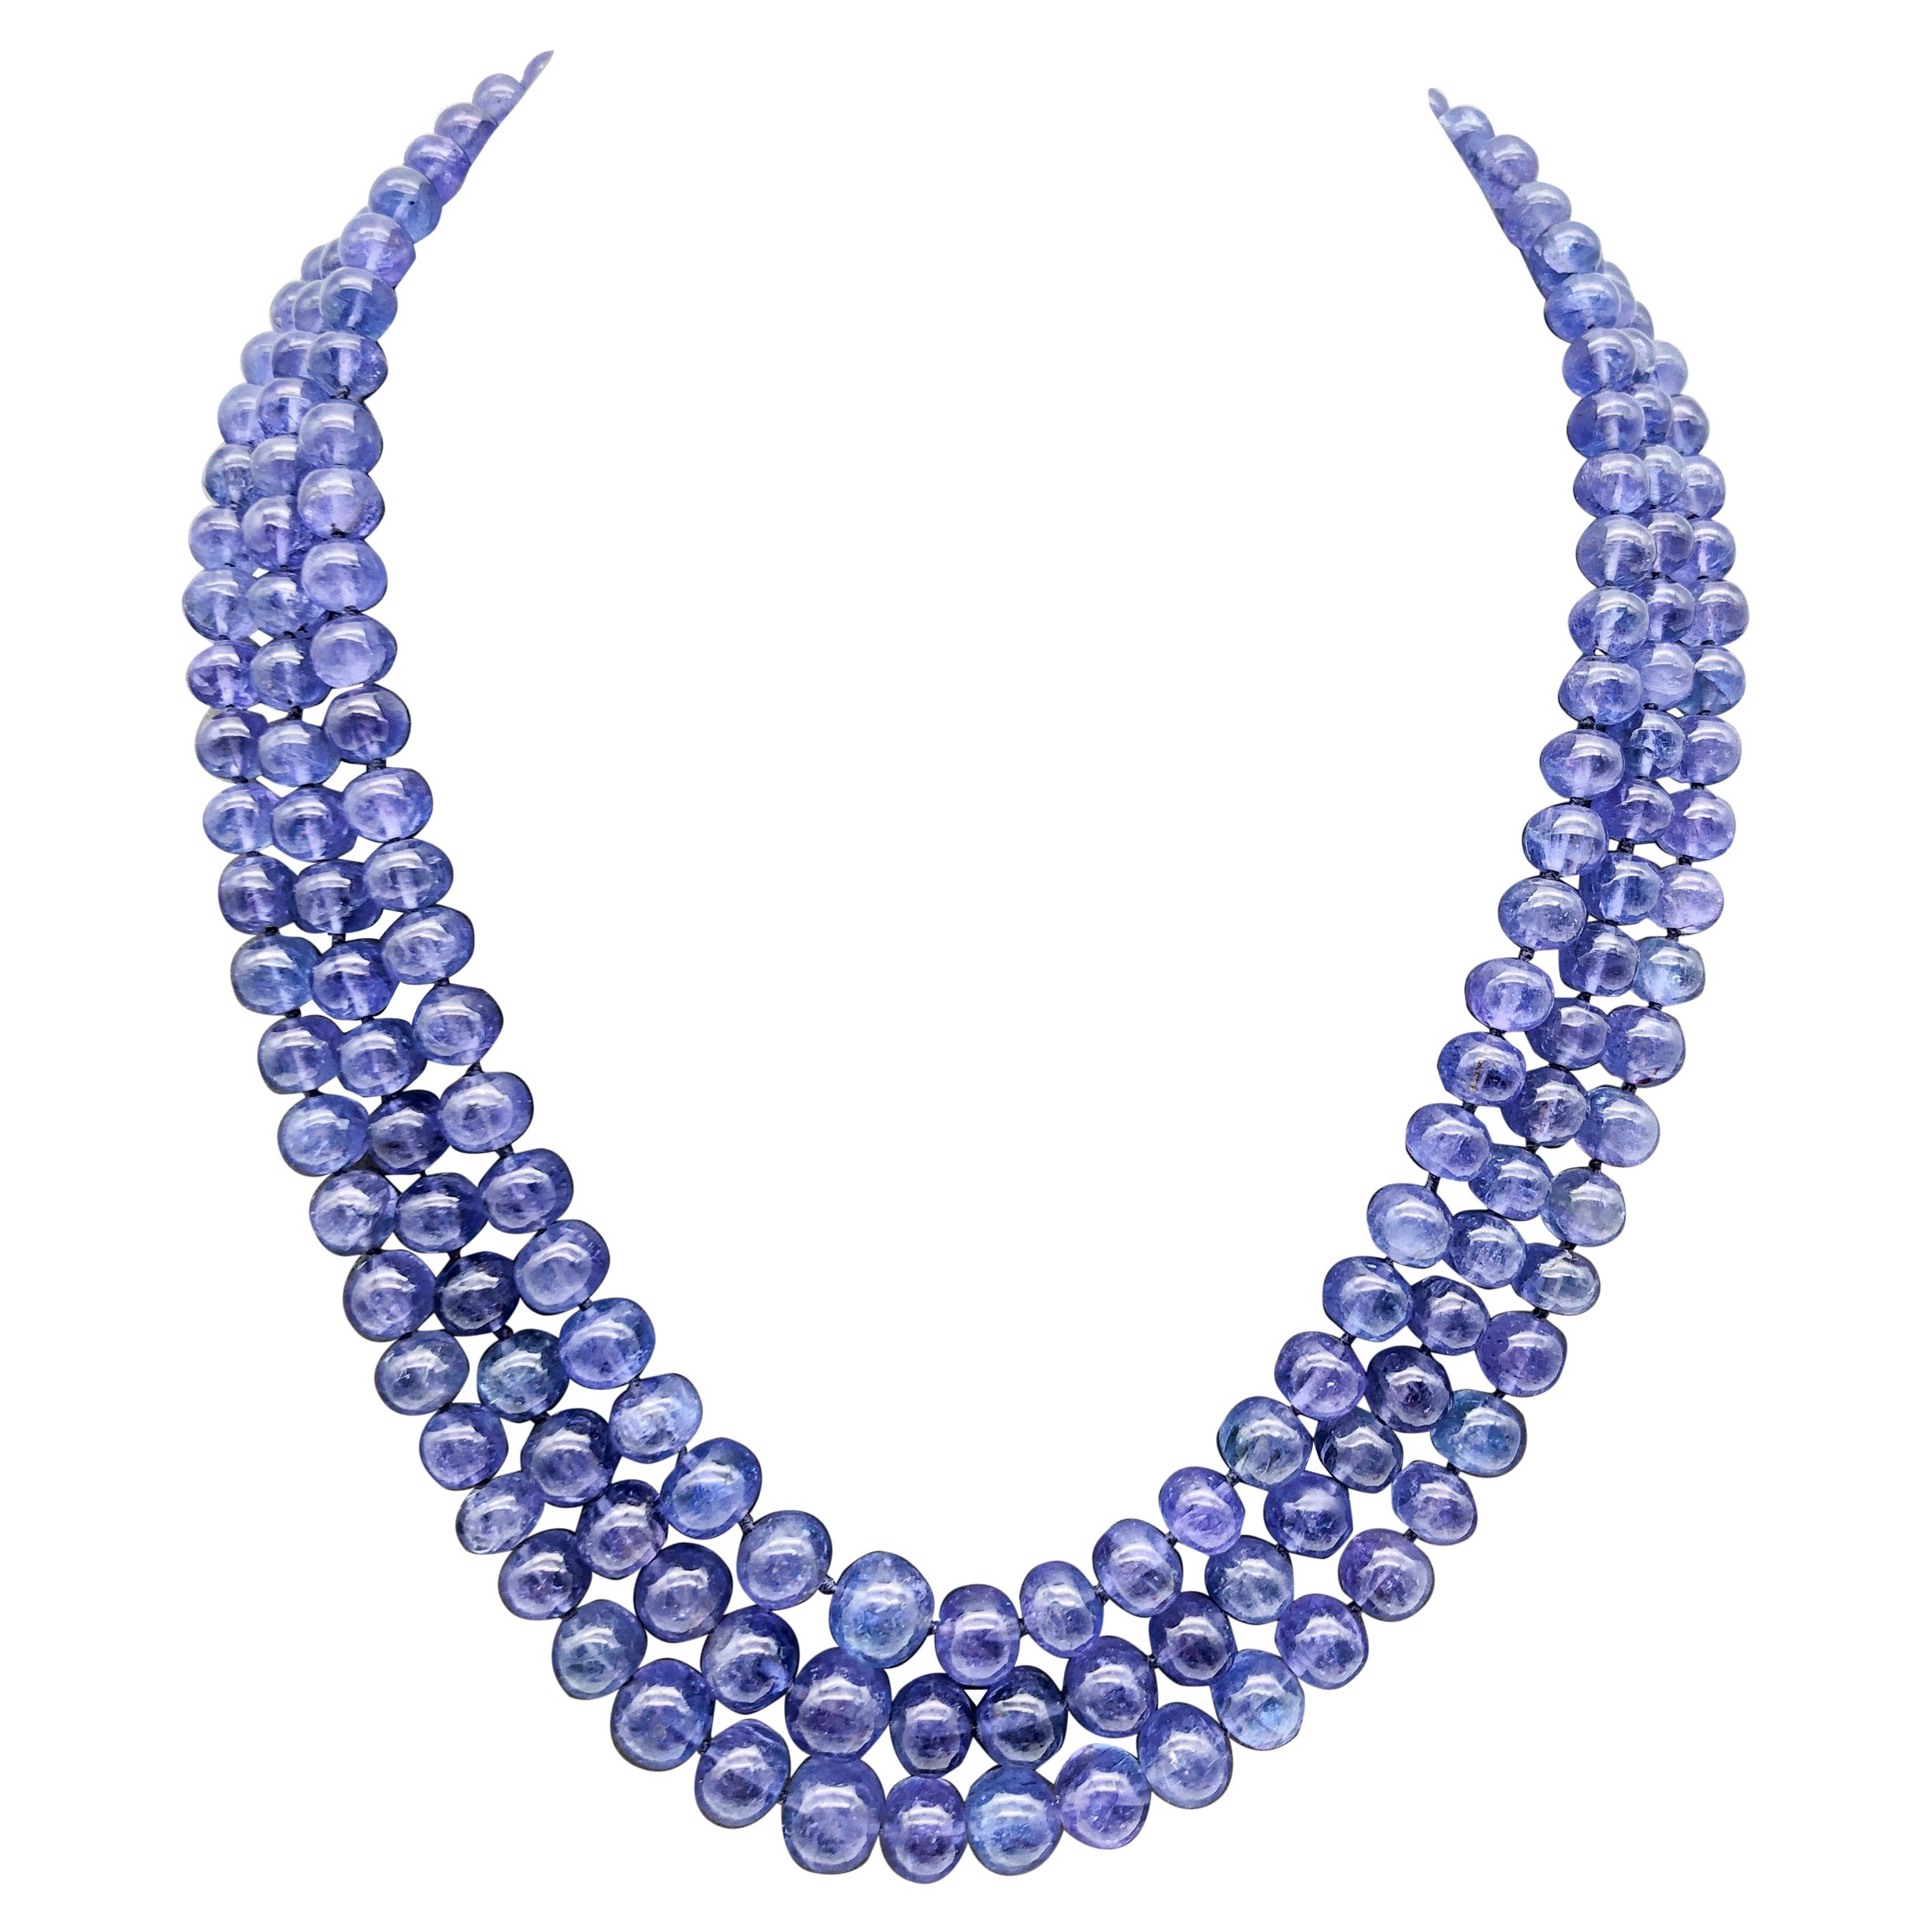 A.Jeschel The "must-have" Tanzanite necklace